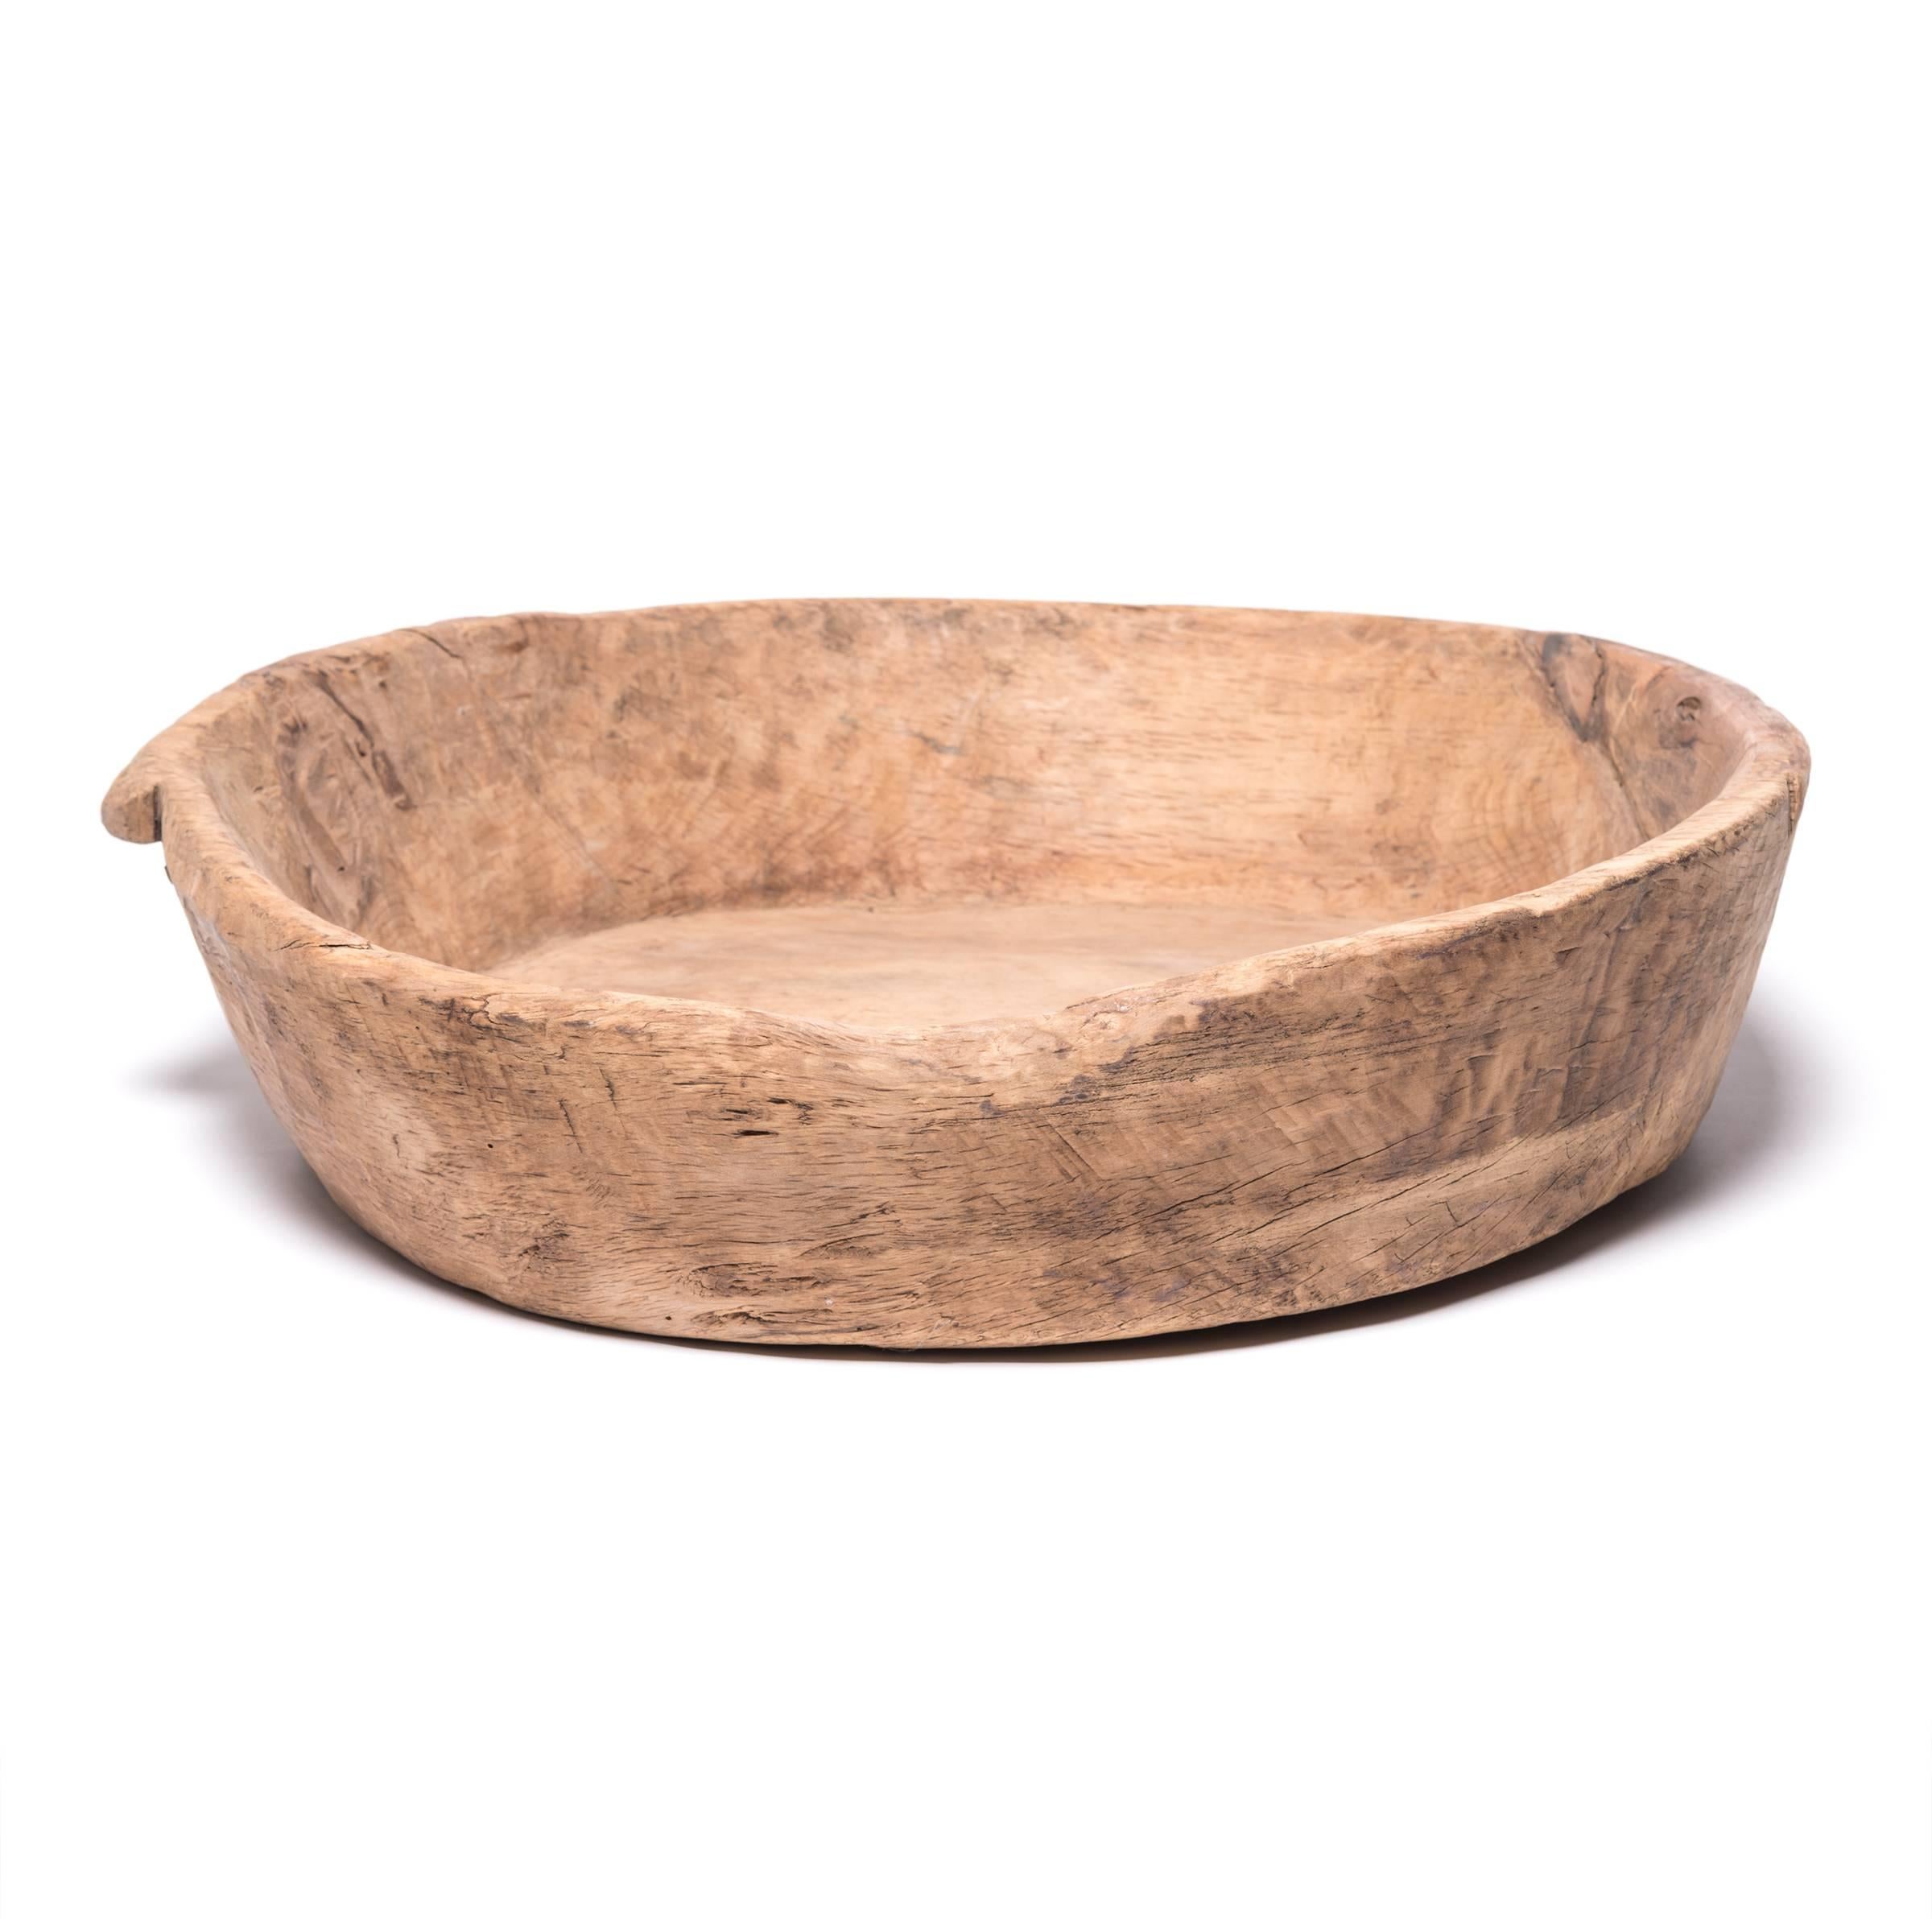 Originally crafted in Mongolia, this tray's imperfect round is a wabi-sabi reference to daily life in faraway pastures. Hand-carved from cypress, its soft nature has been enriched by over one hundred years of use. It is a warm welcome to modern